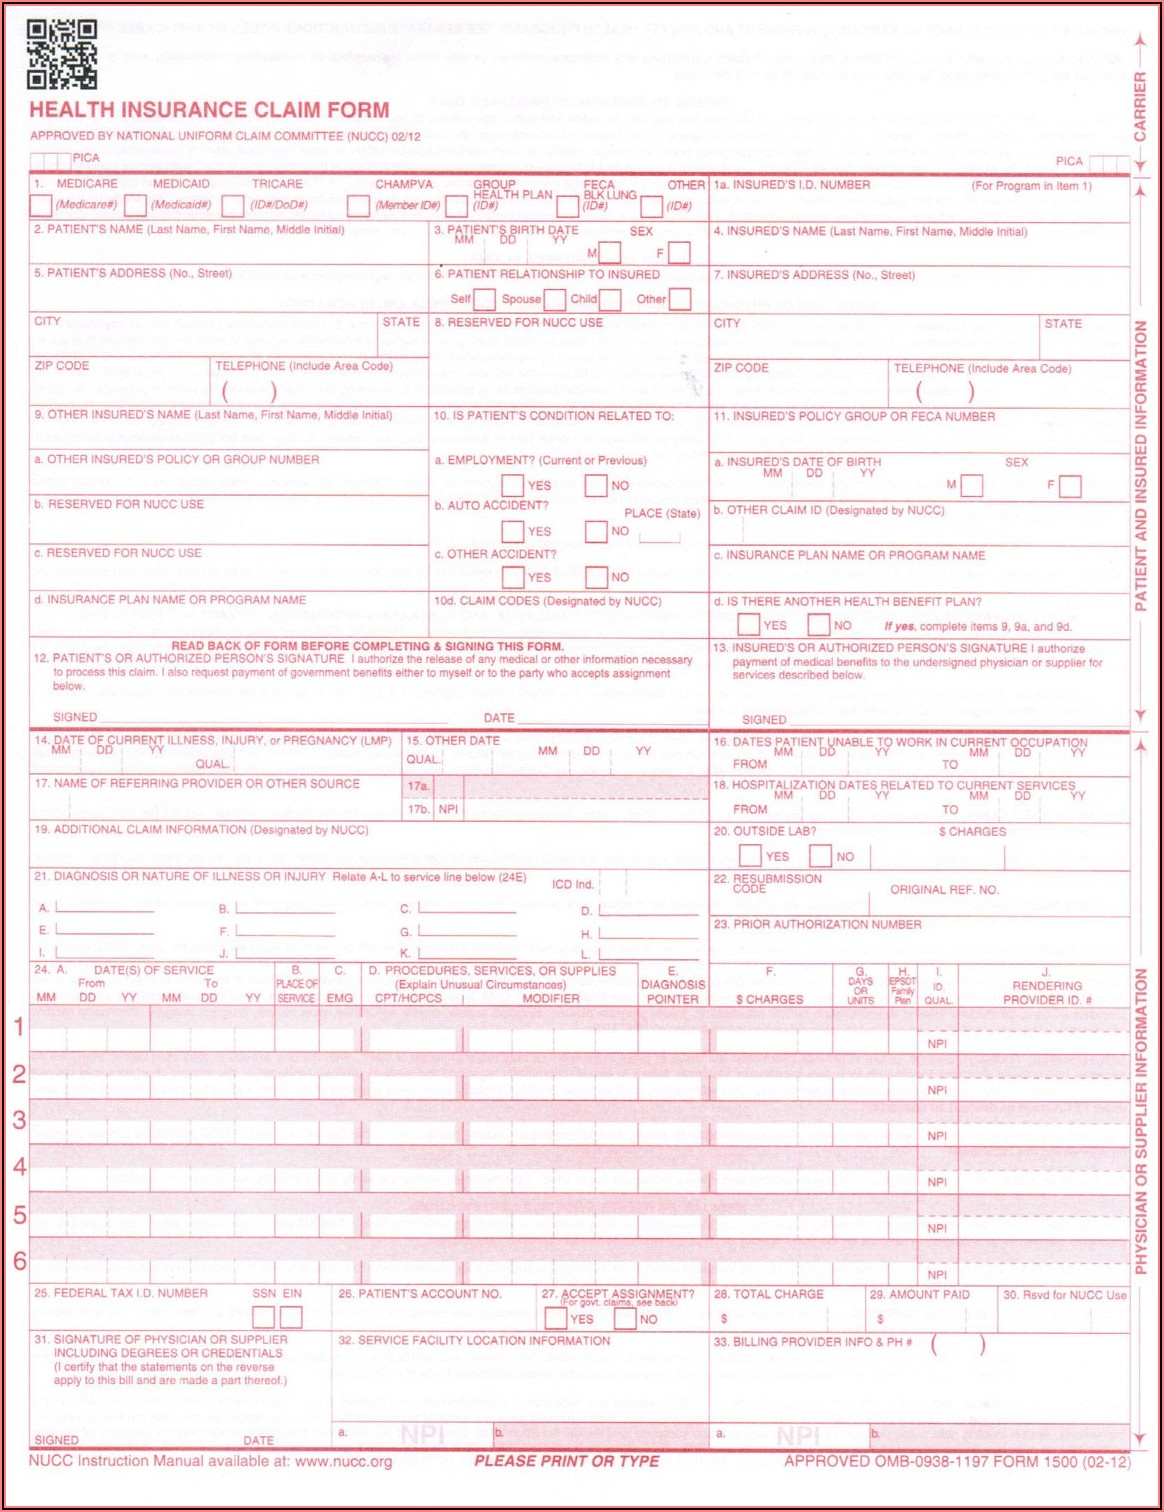 Where Can I Buy Hcfa 1500 Forms